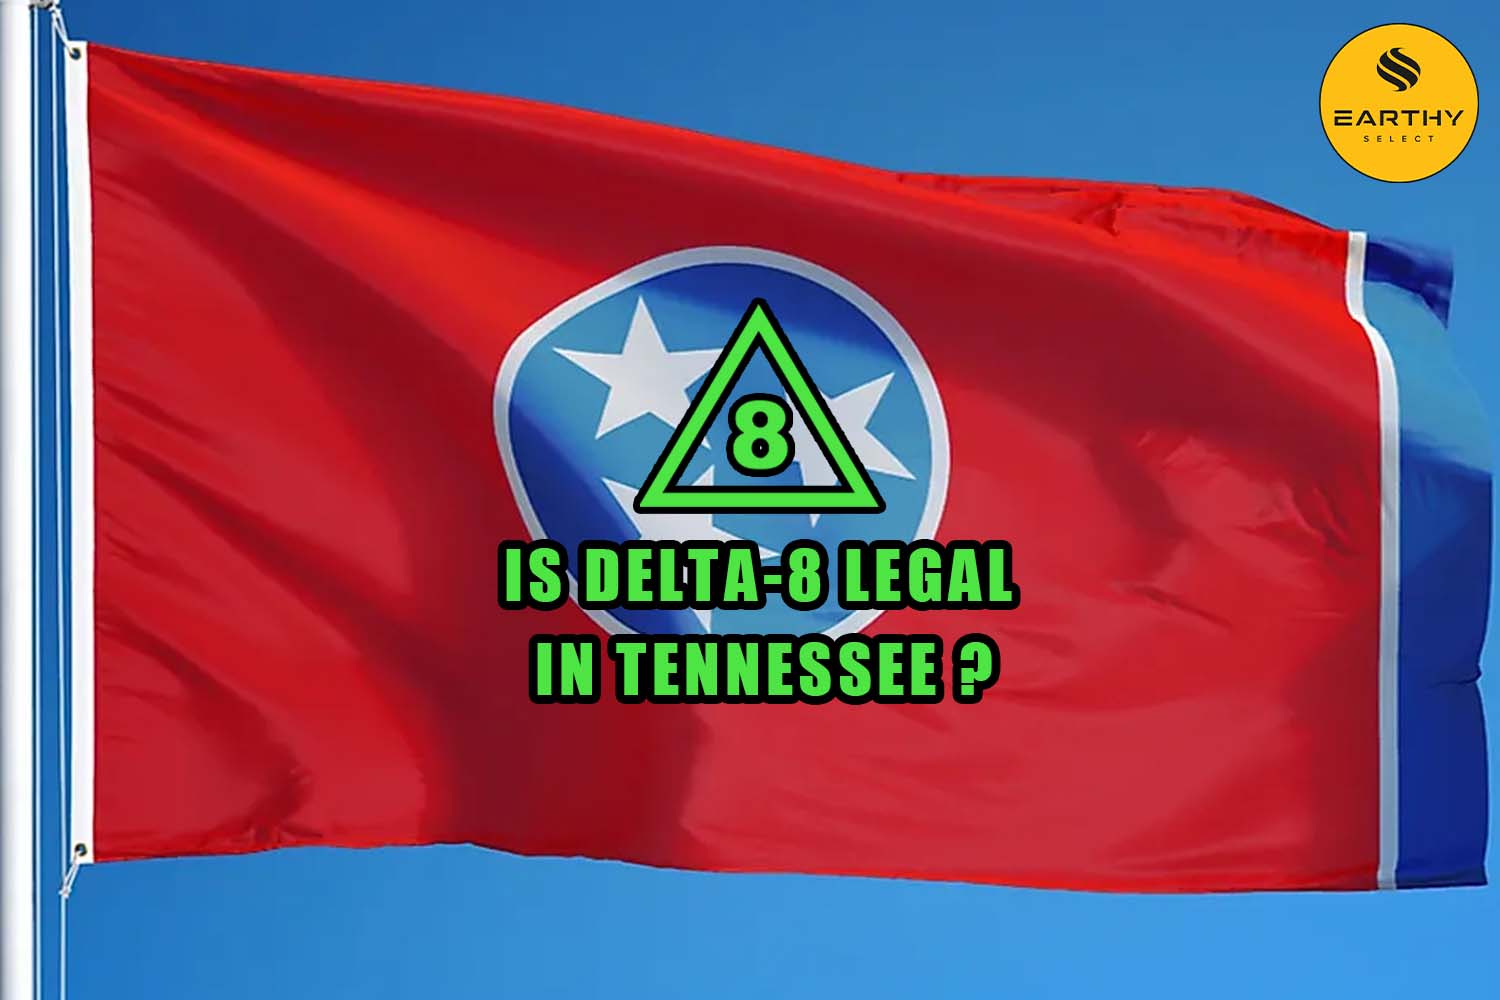 Is Delta 8 THC legal in Tennessee flag